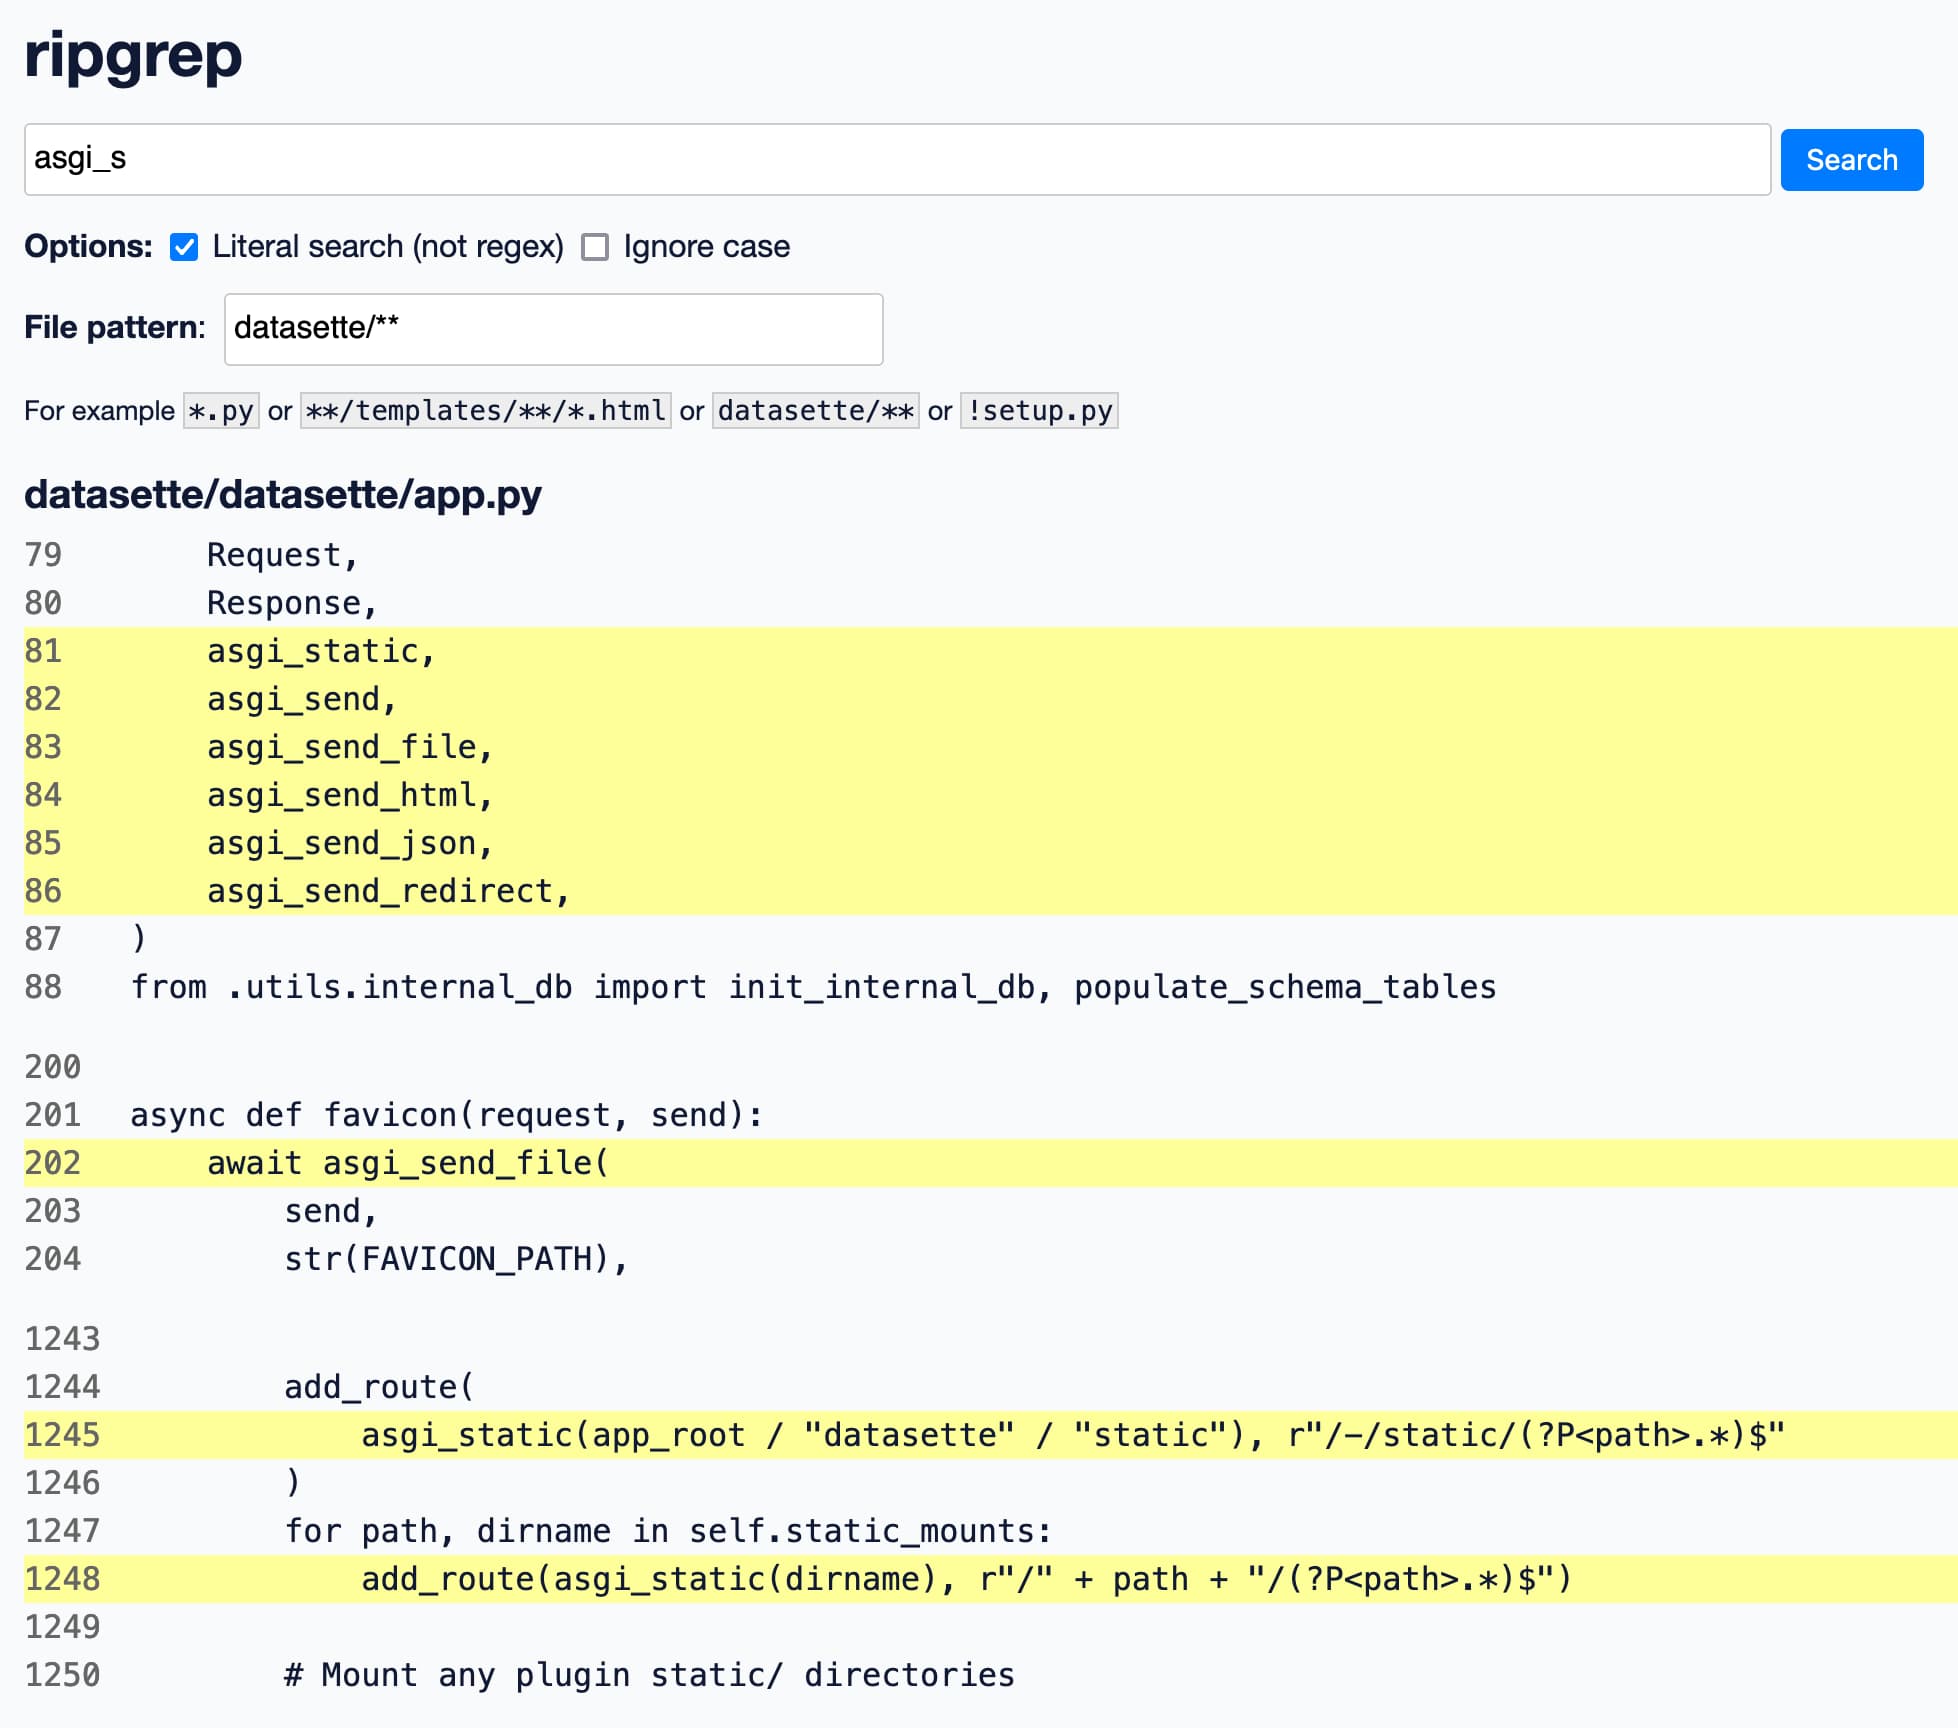 Screenshot of some code search results - matching lines are highlighted in yellow and there are small gaps between non-consecutive groups of line numbers